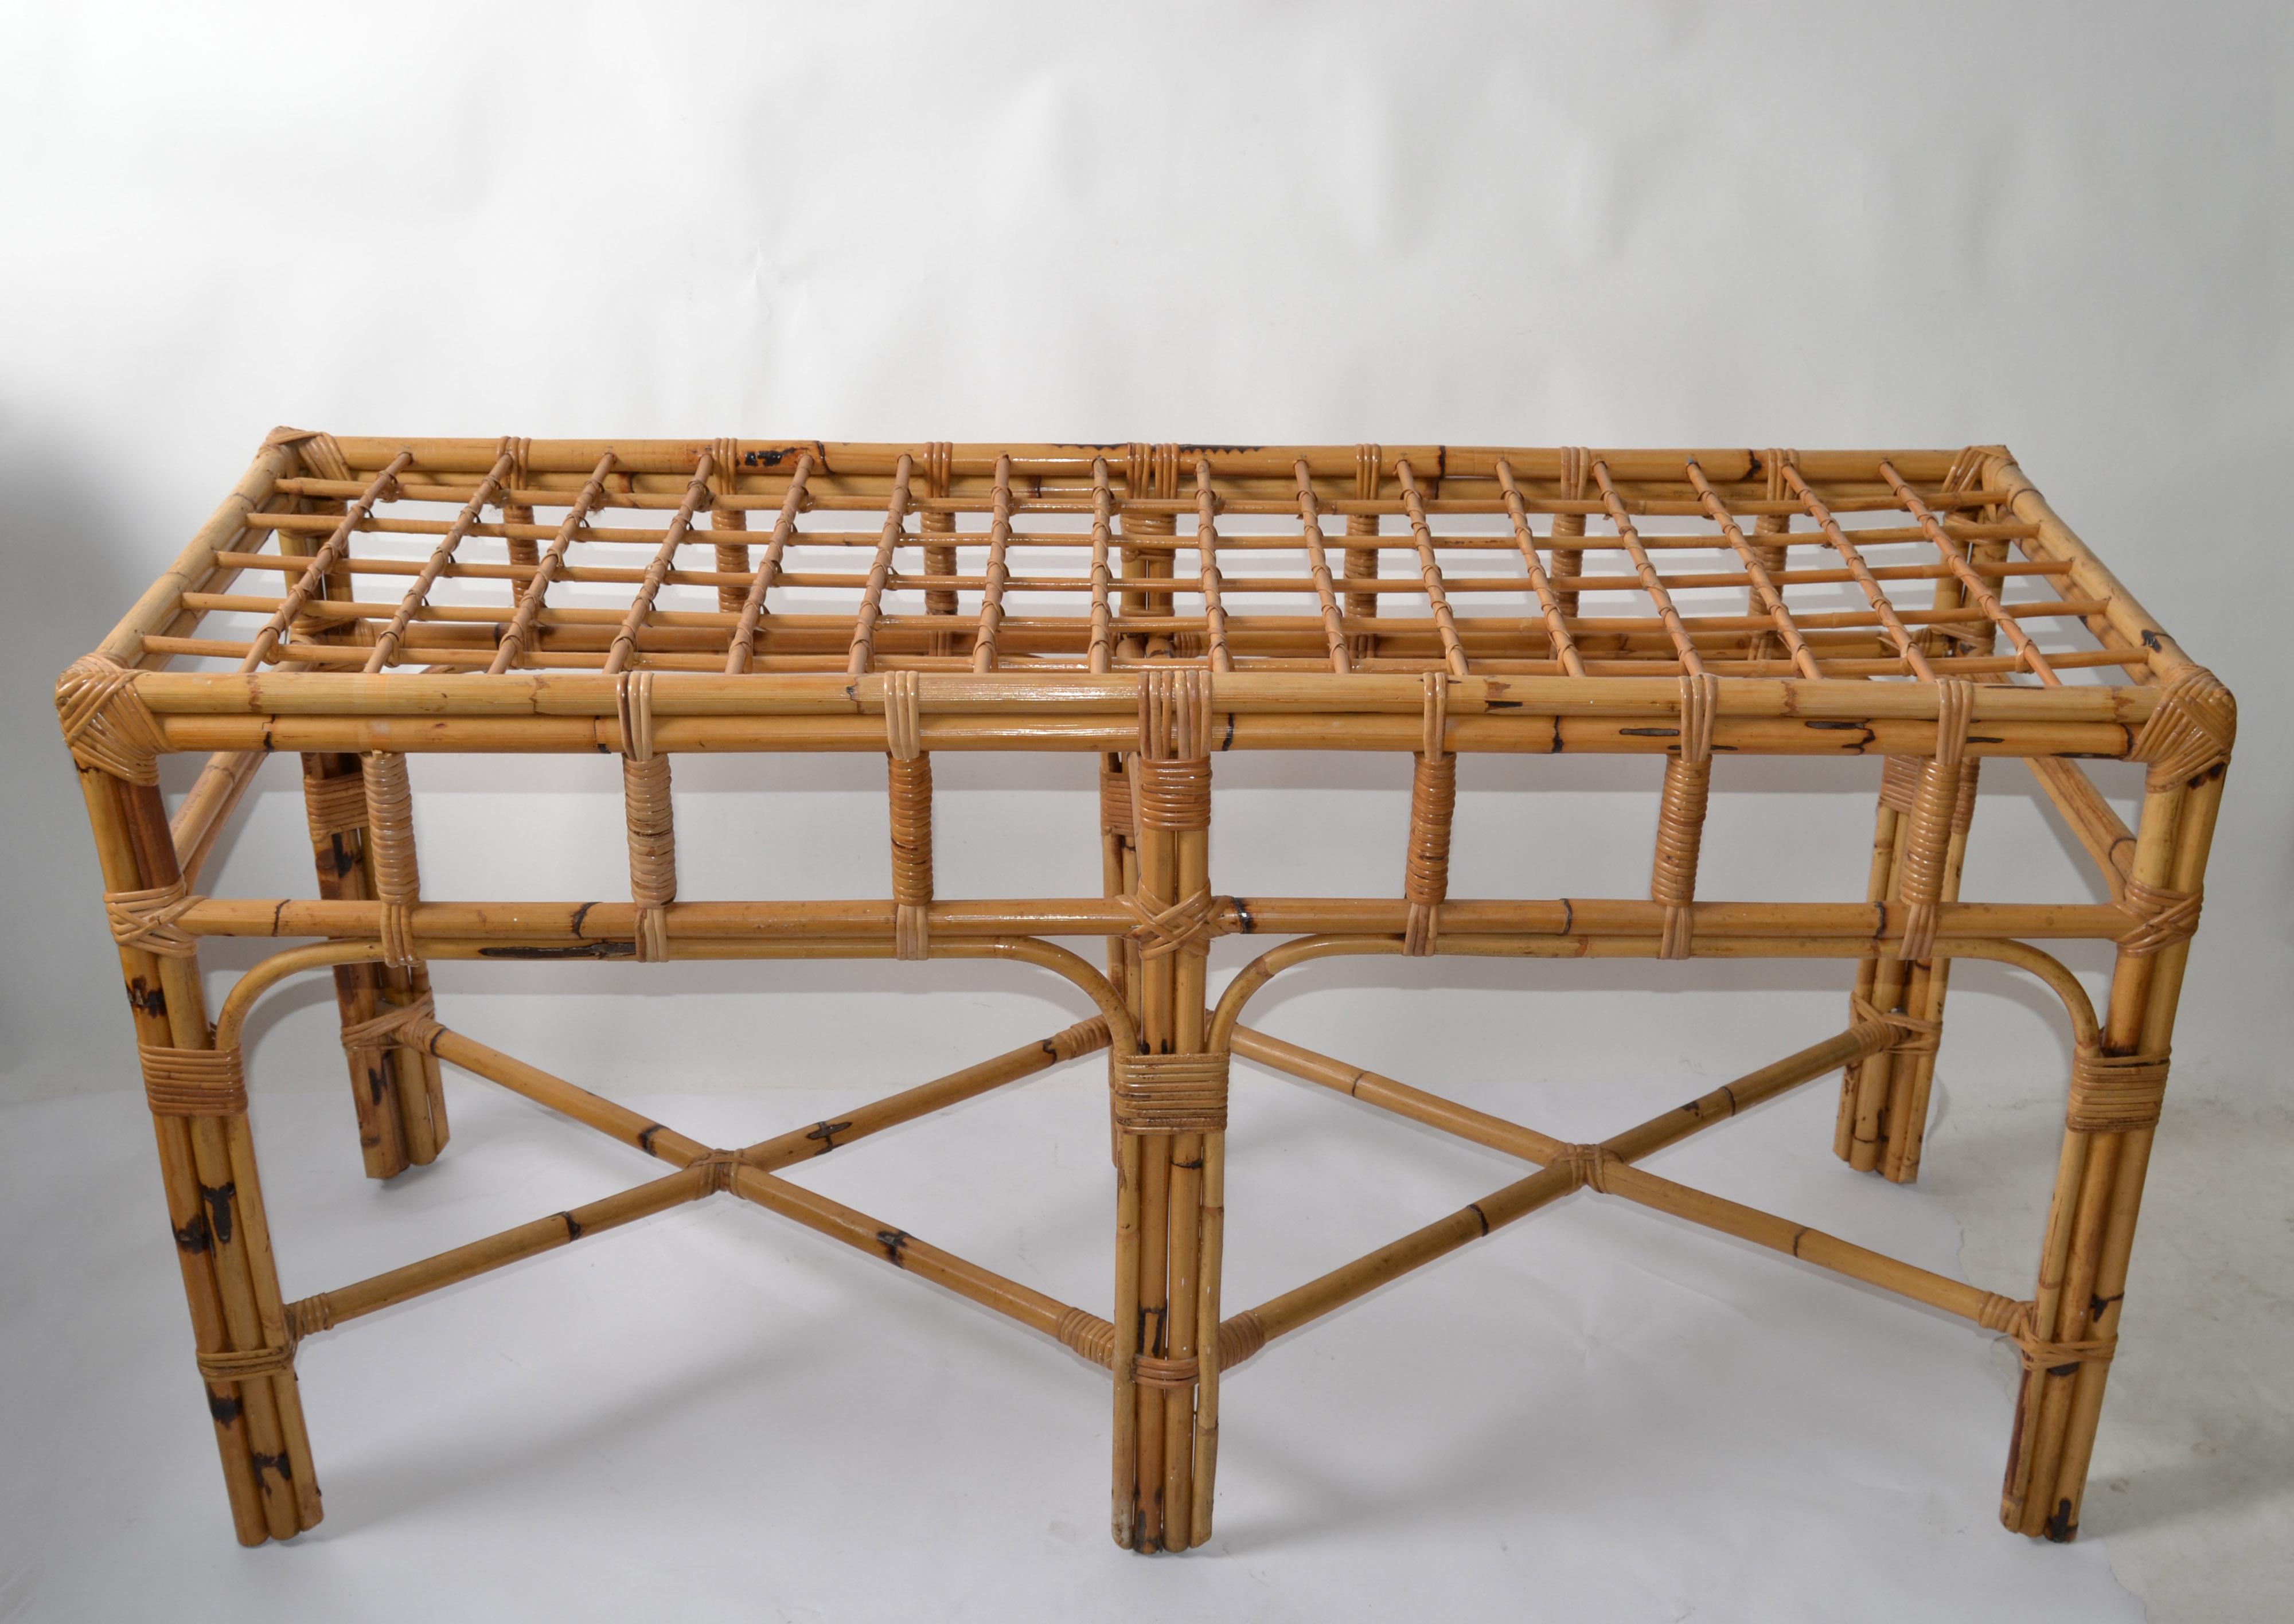 20th Century American Mid-Century Modern 6 Legs Bent Bamboo & Rattan Glass Top Console Table  For Sale